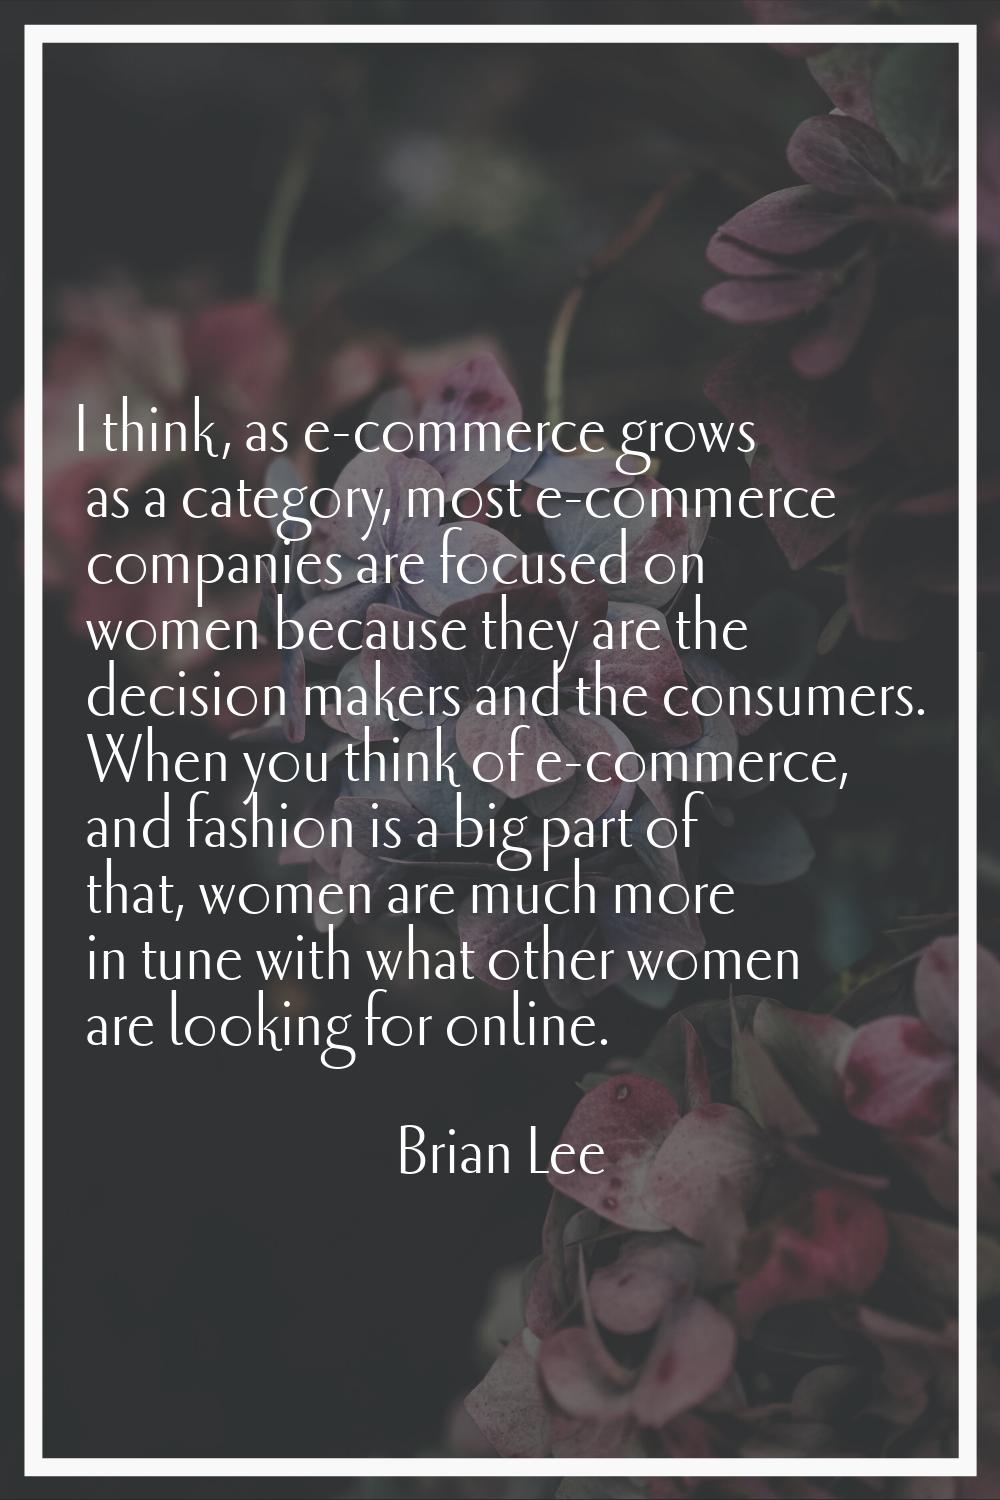 I think, as e-commerce grows as a category, most e-commerce companies are focused on women because 